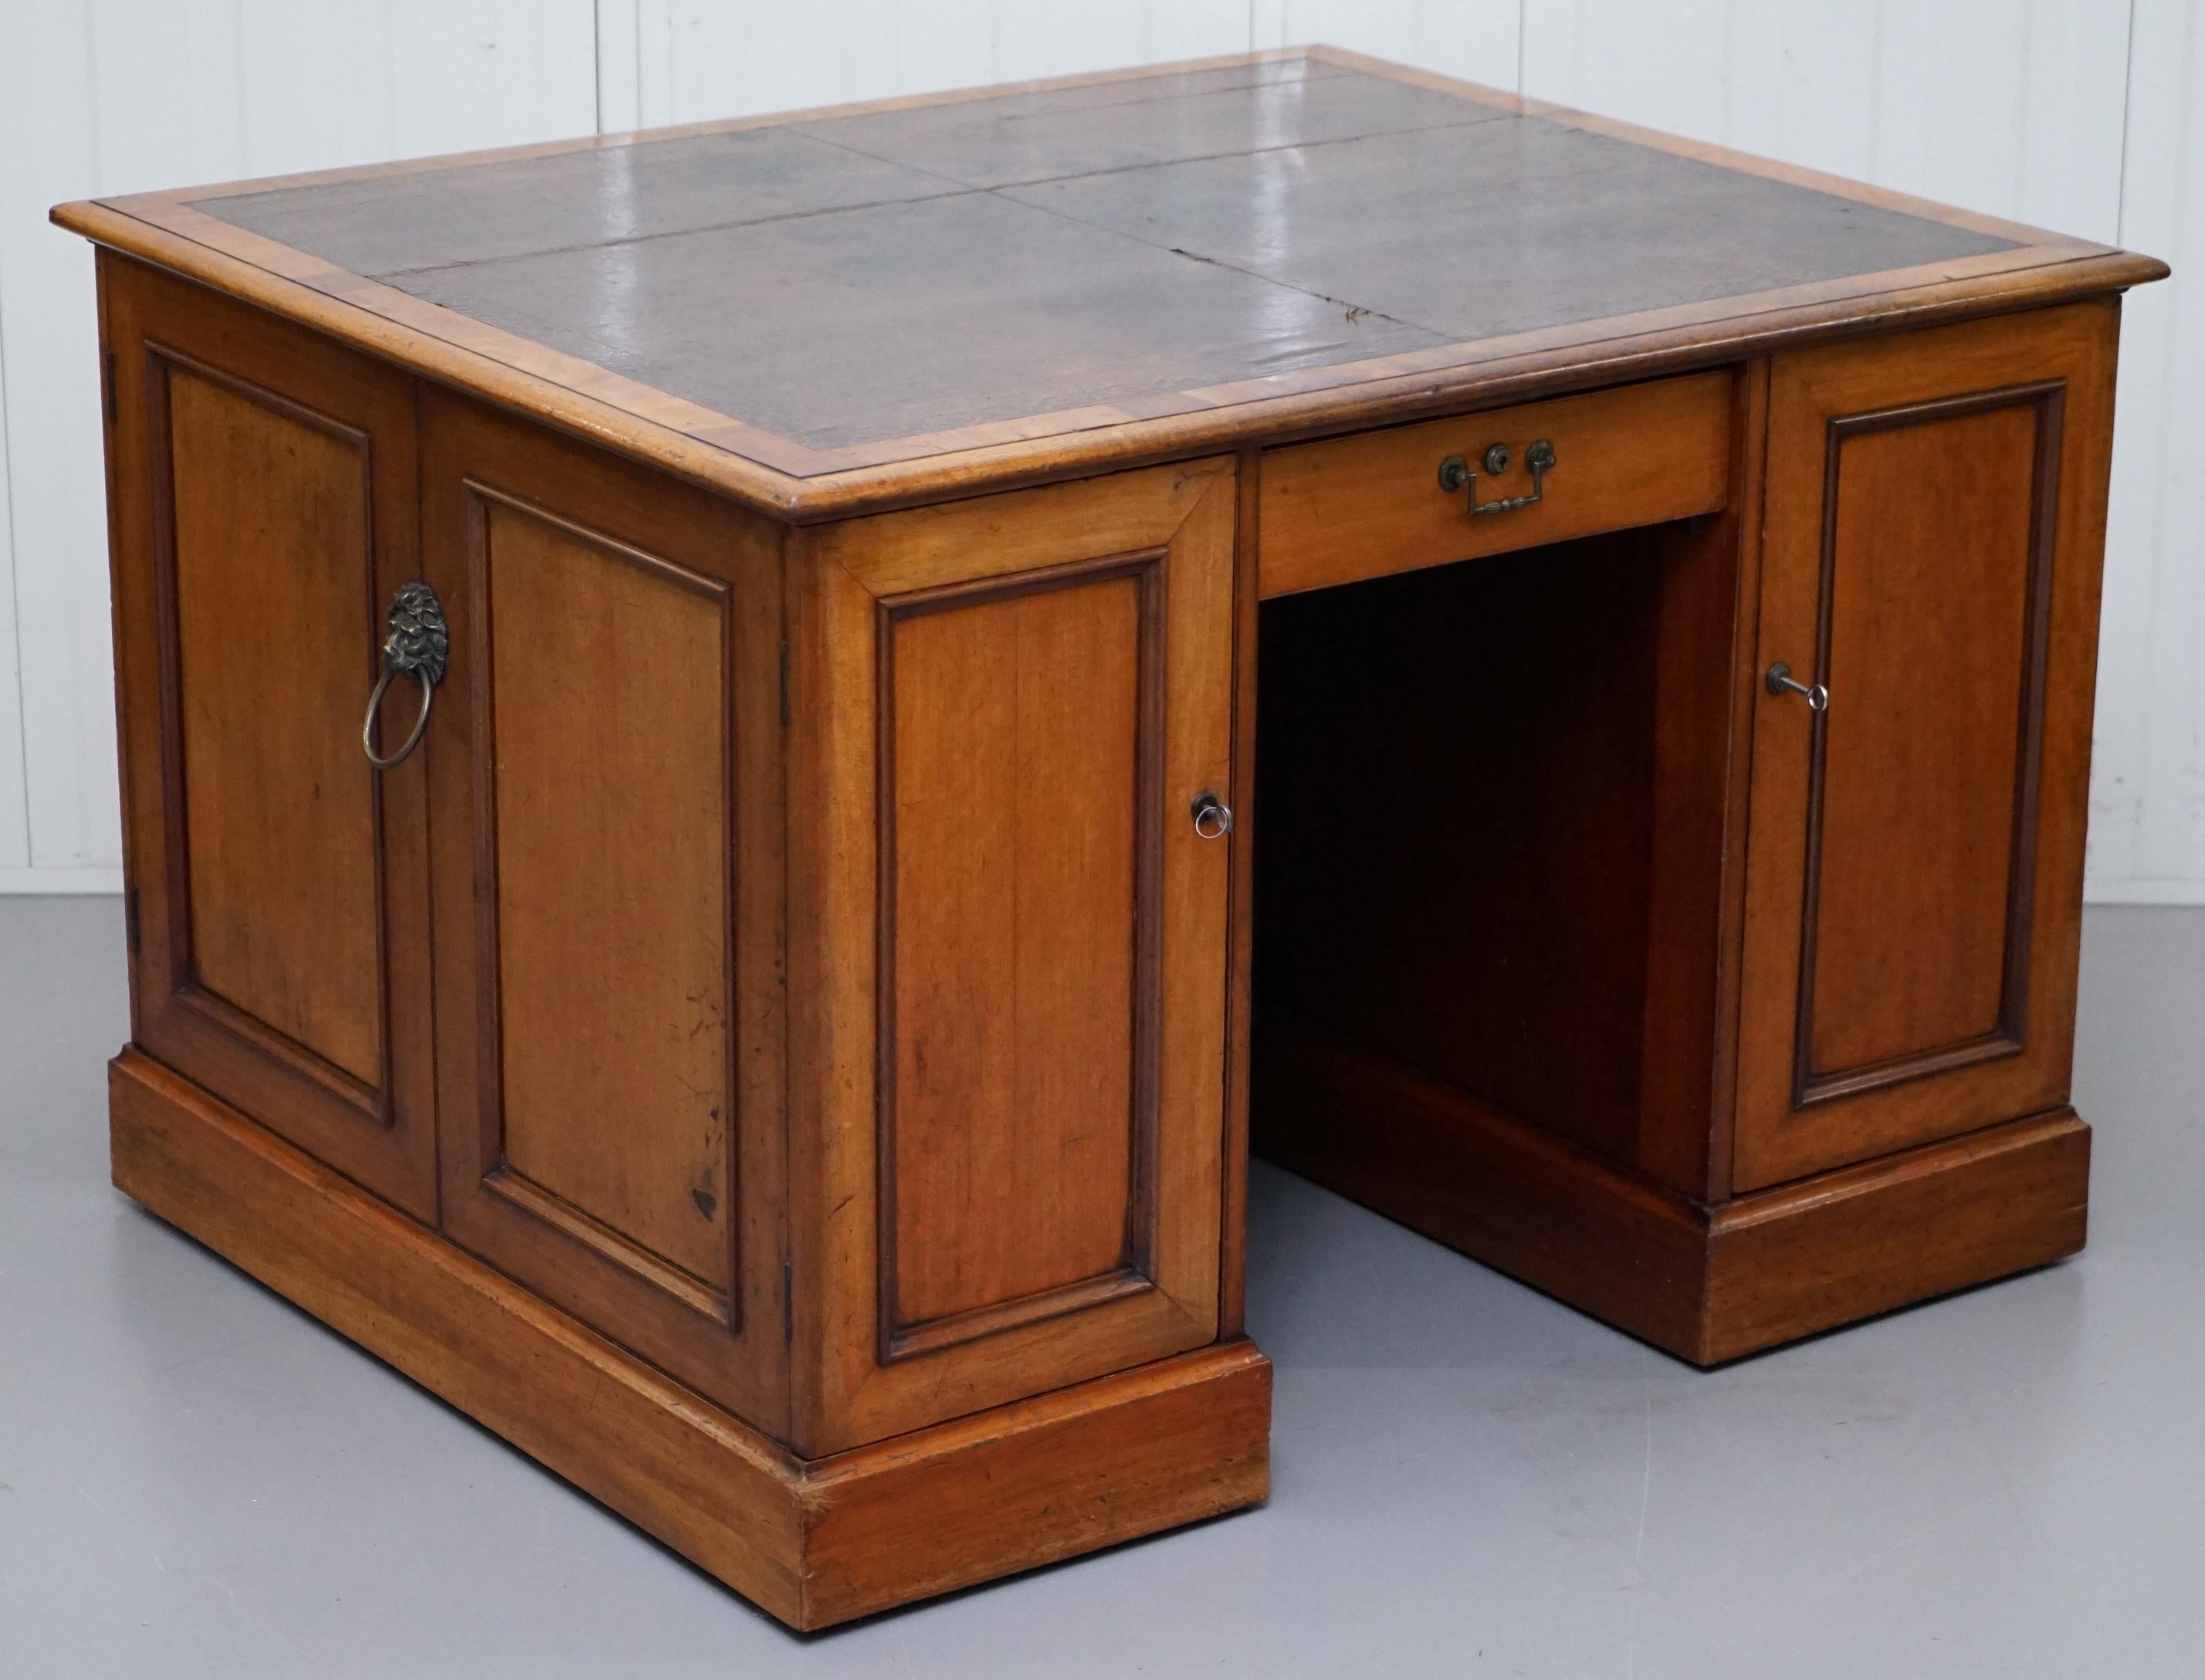 We are delighted to offer for sale this stunning and exceptionally rare 1794 George III Gillows Lancaster twin pedestal double sided postmasters desk in paneled mahogany

I have never seen another with this particular type of drawer and cupboard